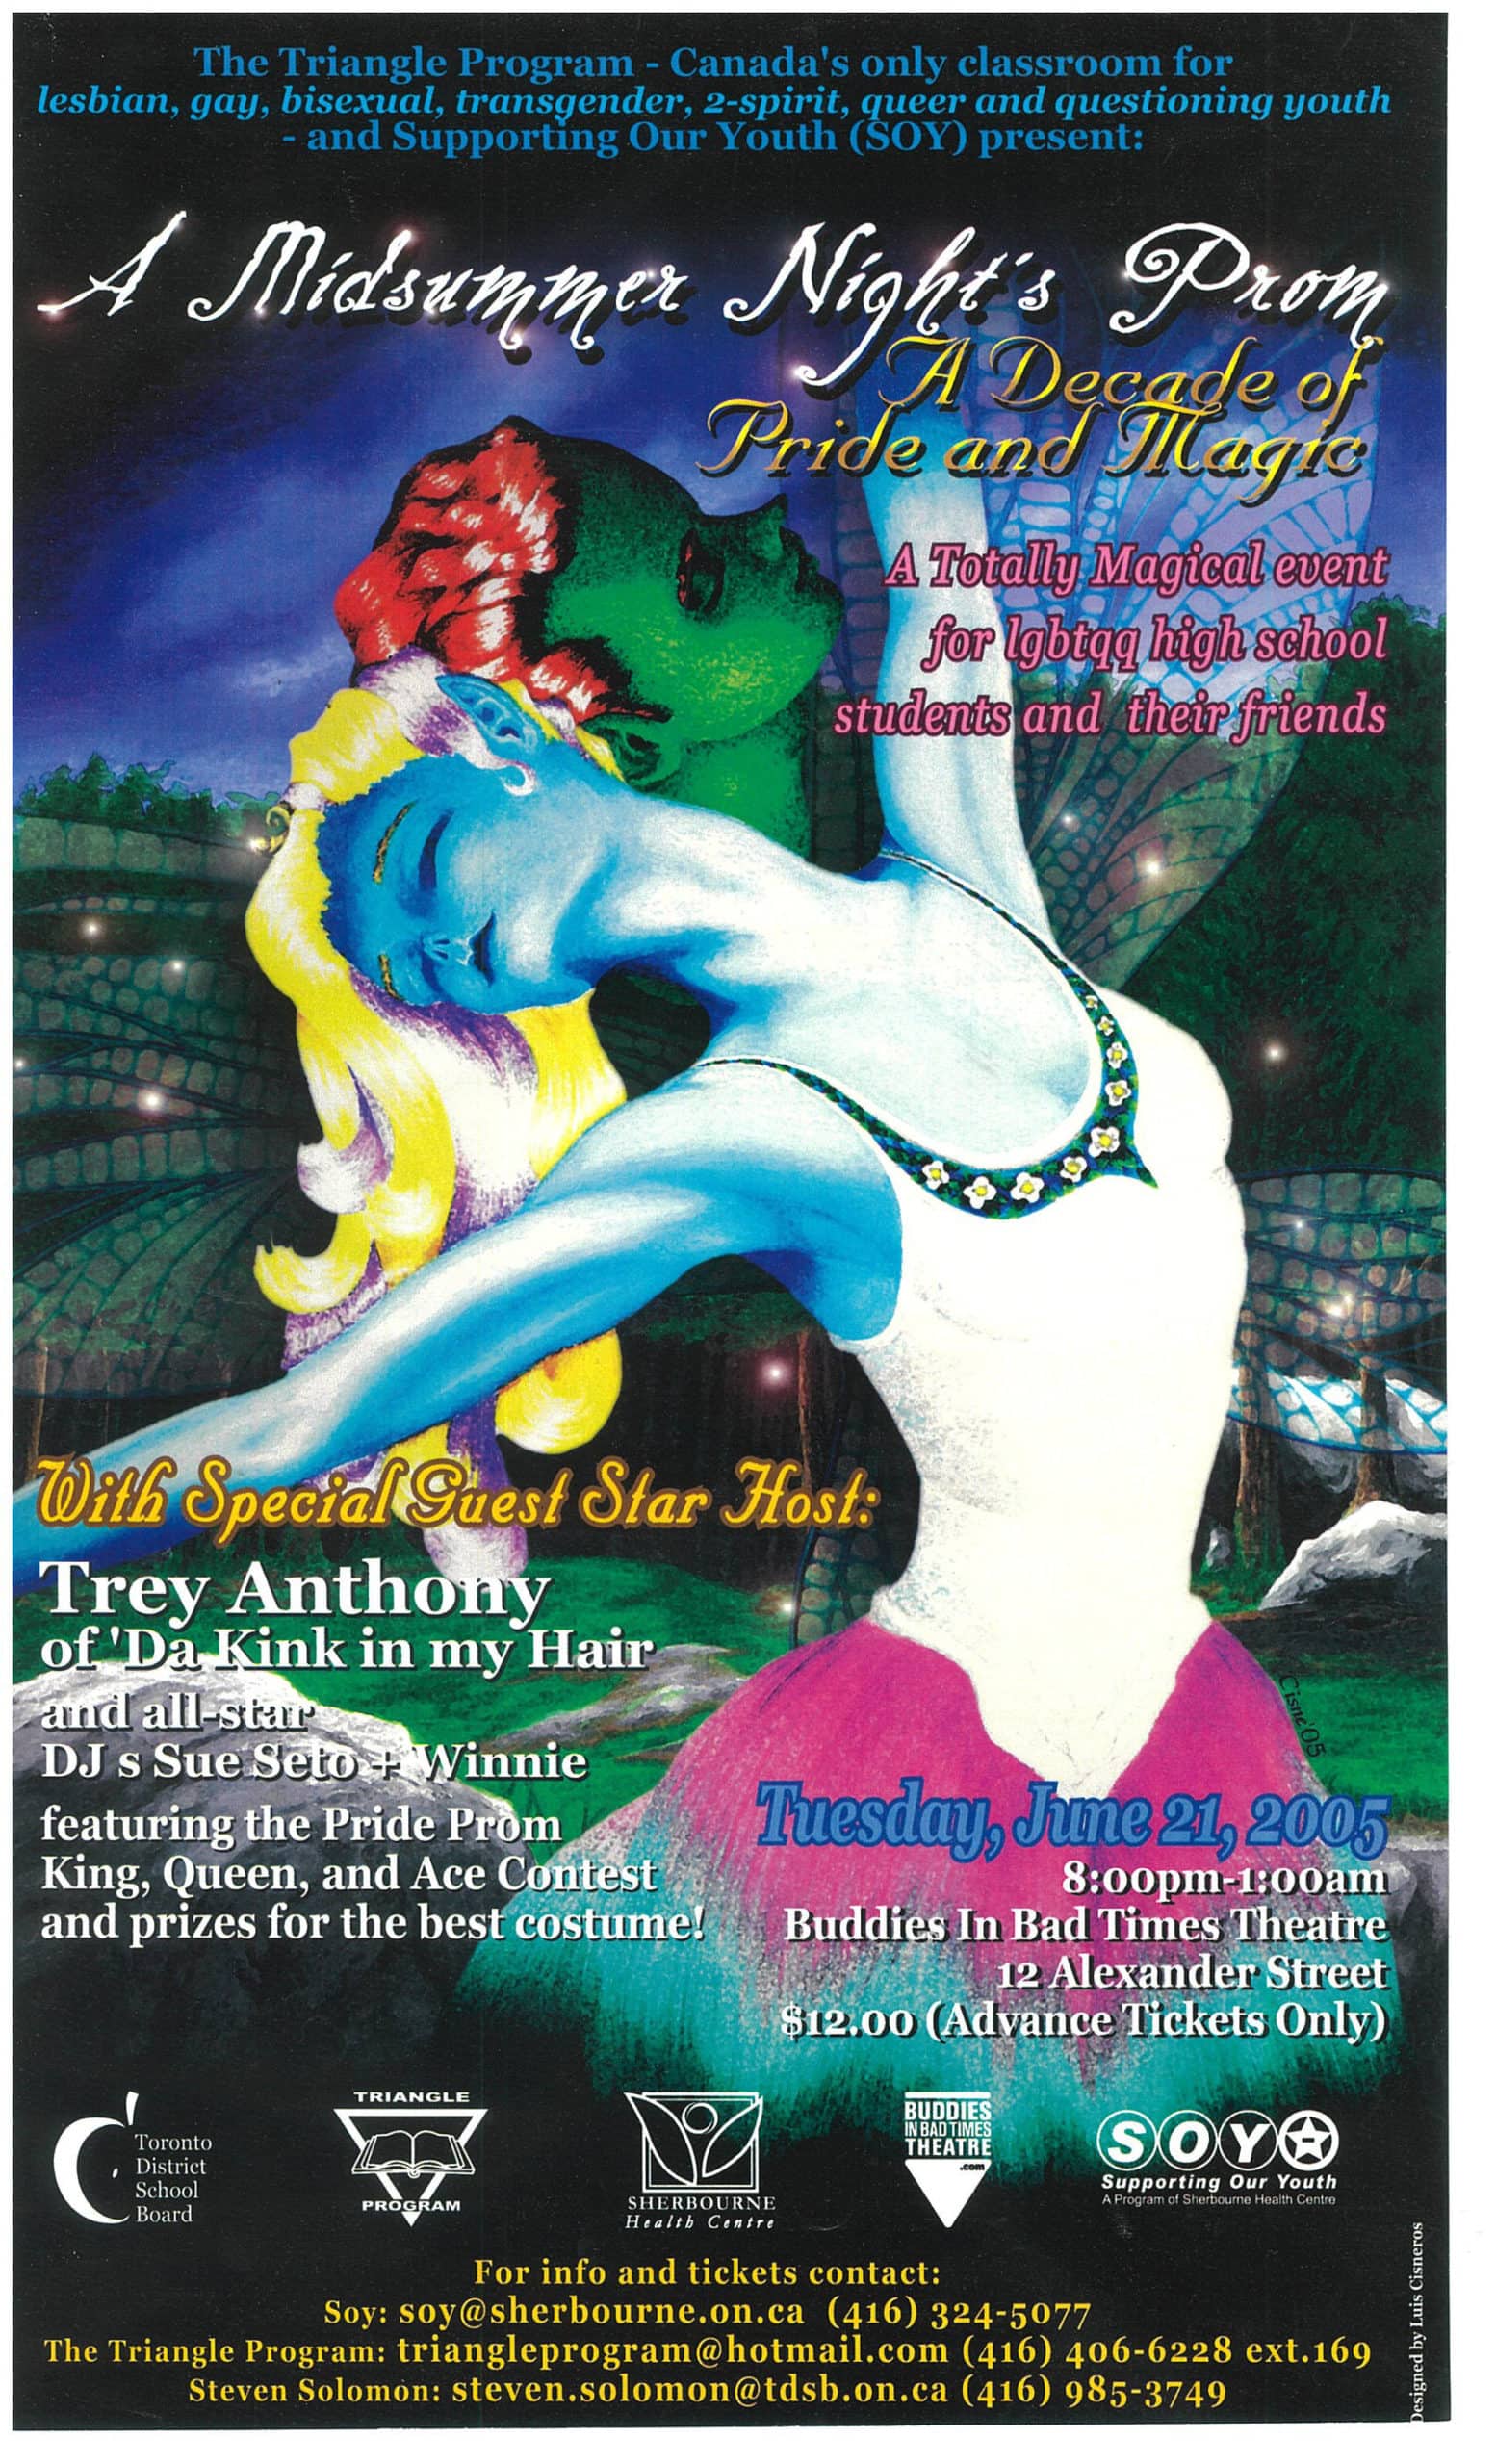 Event poster with a painting of a blue figure in a dress, arms outstretched, and a green figure with their face touching, in front of a night landscape